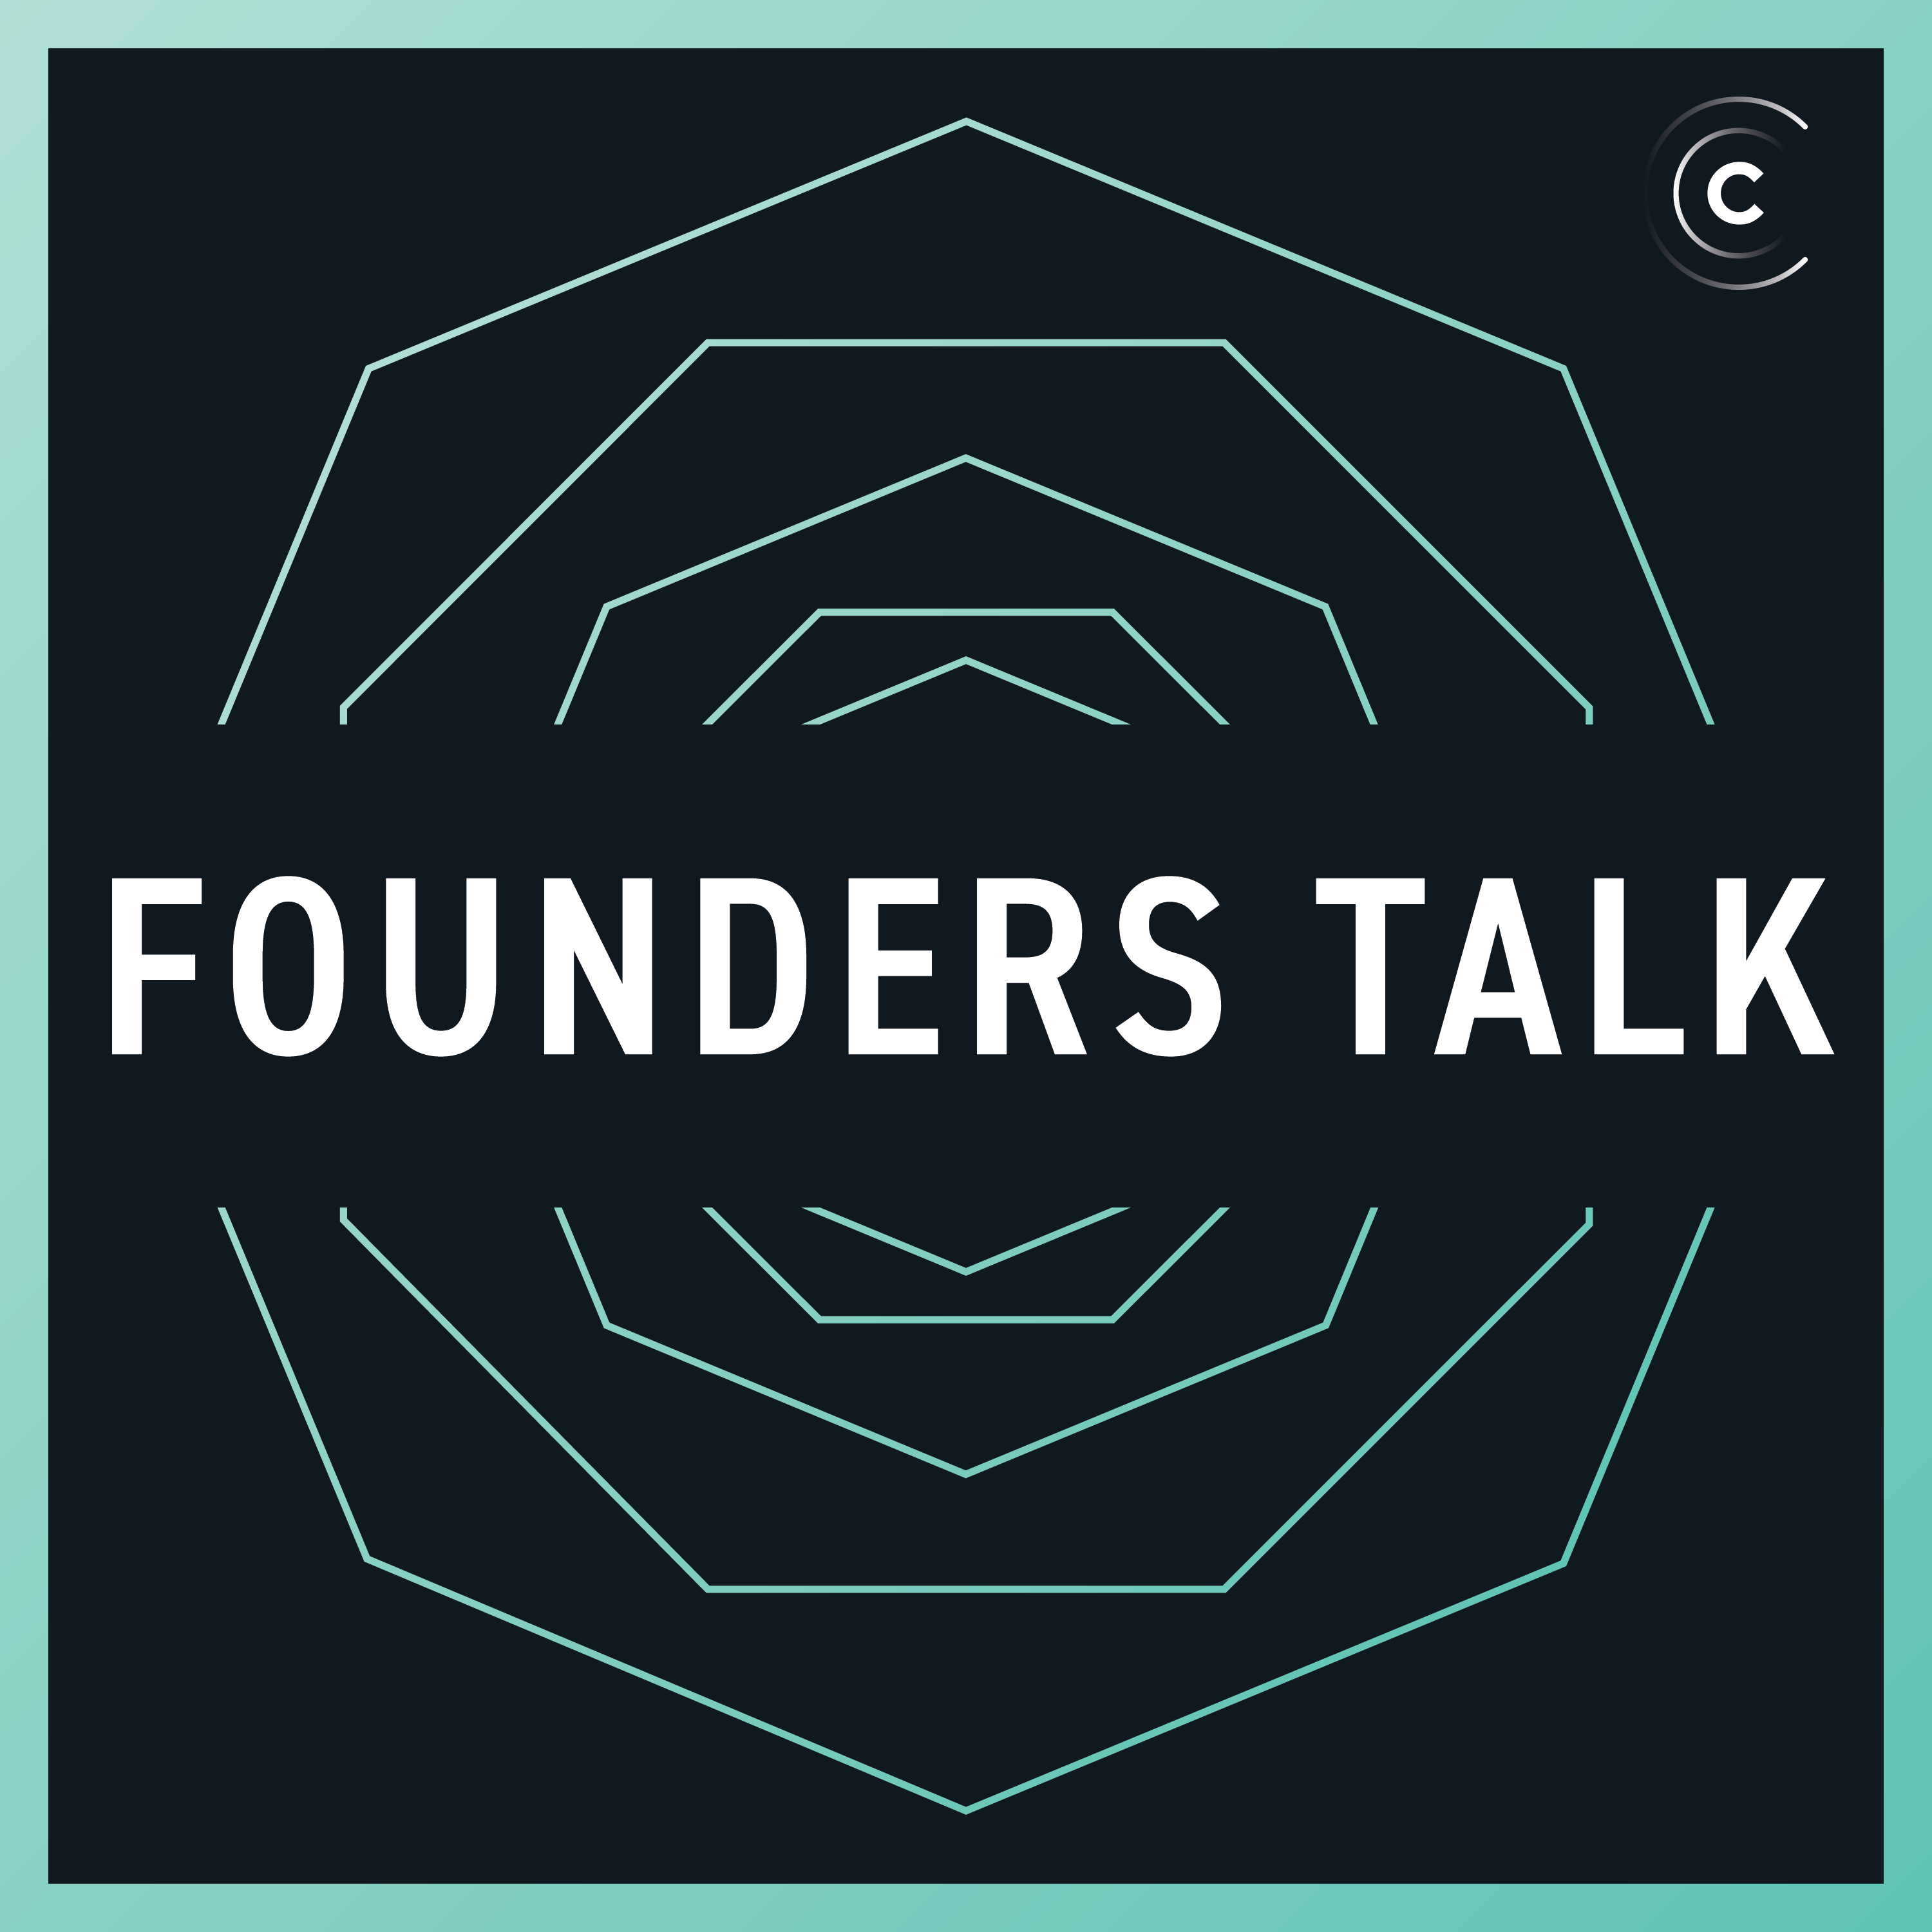 The Founders Talk podcast